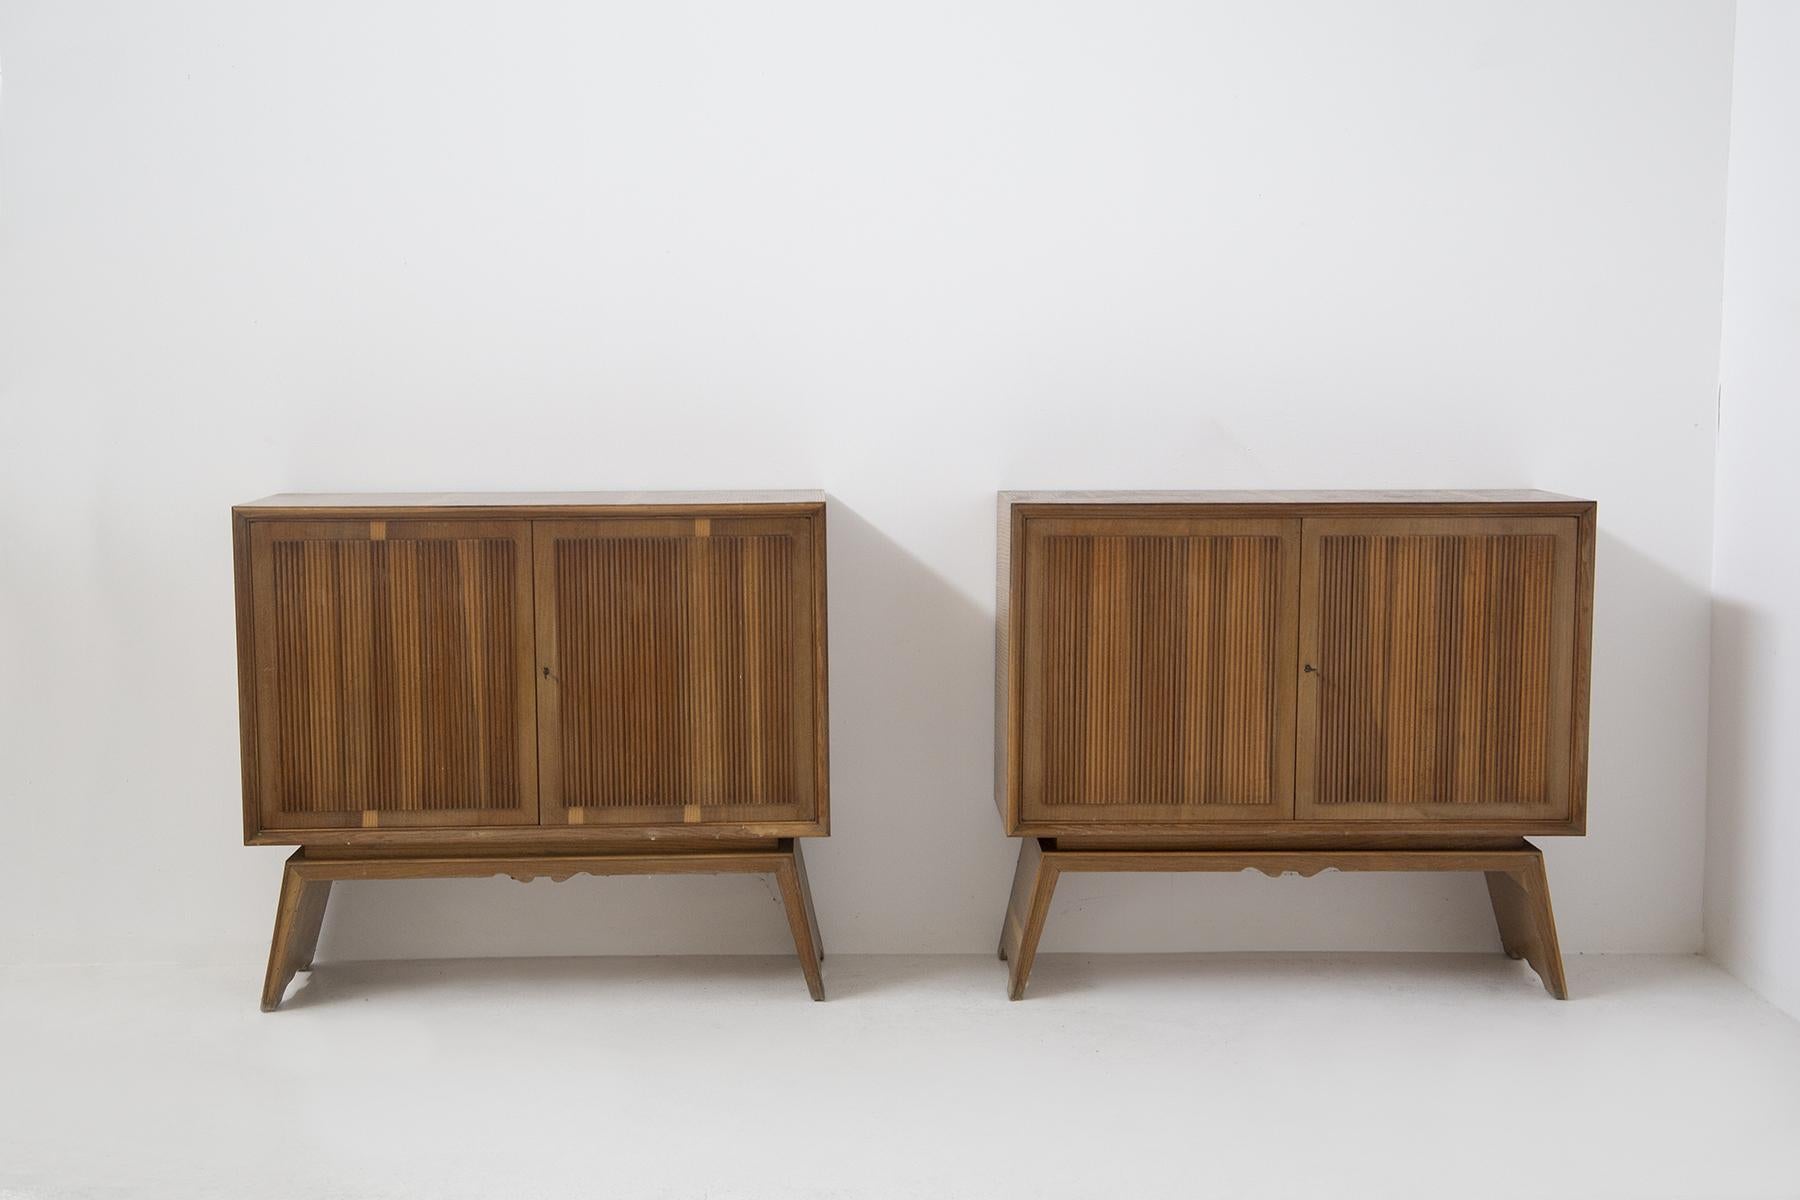 Gorgeous vintage wooden console designed by Paolo Buffa in the 1950s, fine Italian craftsmanship.
The console is made entirely of bleached walnut wood, very fine and elegant. The central body is supported by 2 wooden feet that expand diagonally,